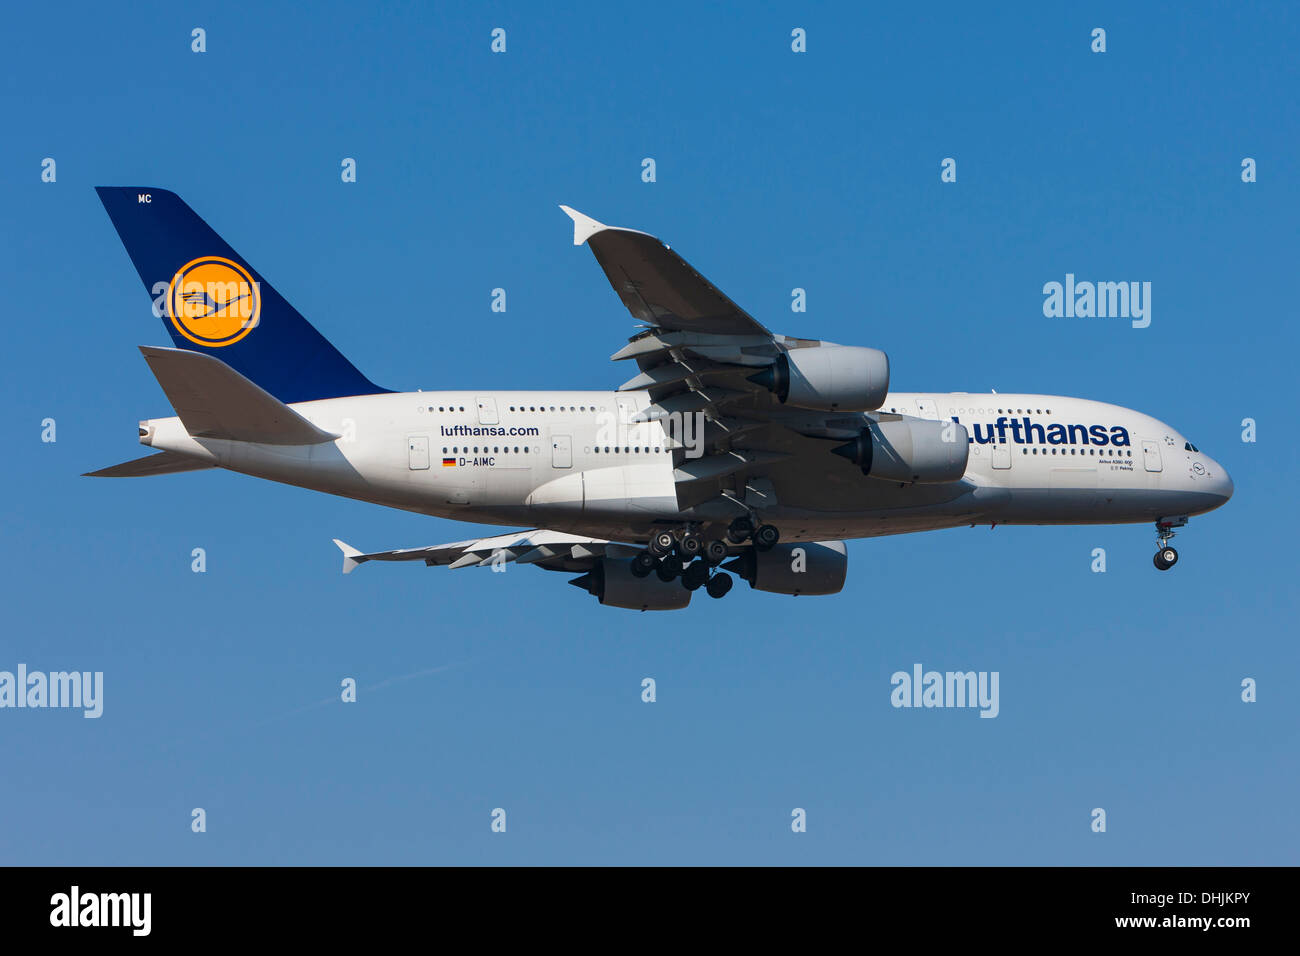 Airbus A380 of Lufthansa Airline approaching at Frankfurt airport Stock Photo